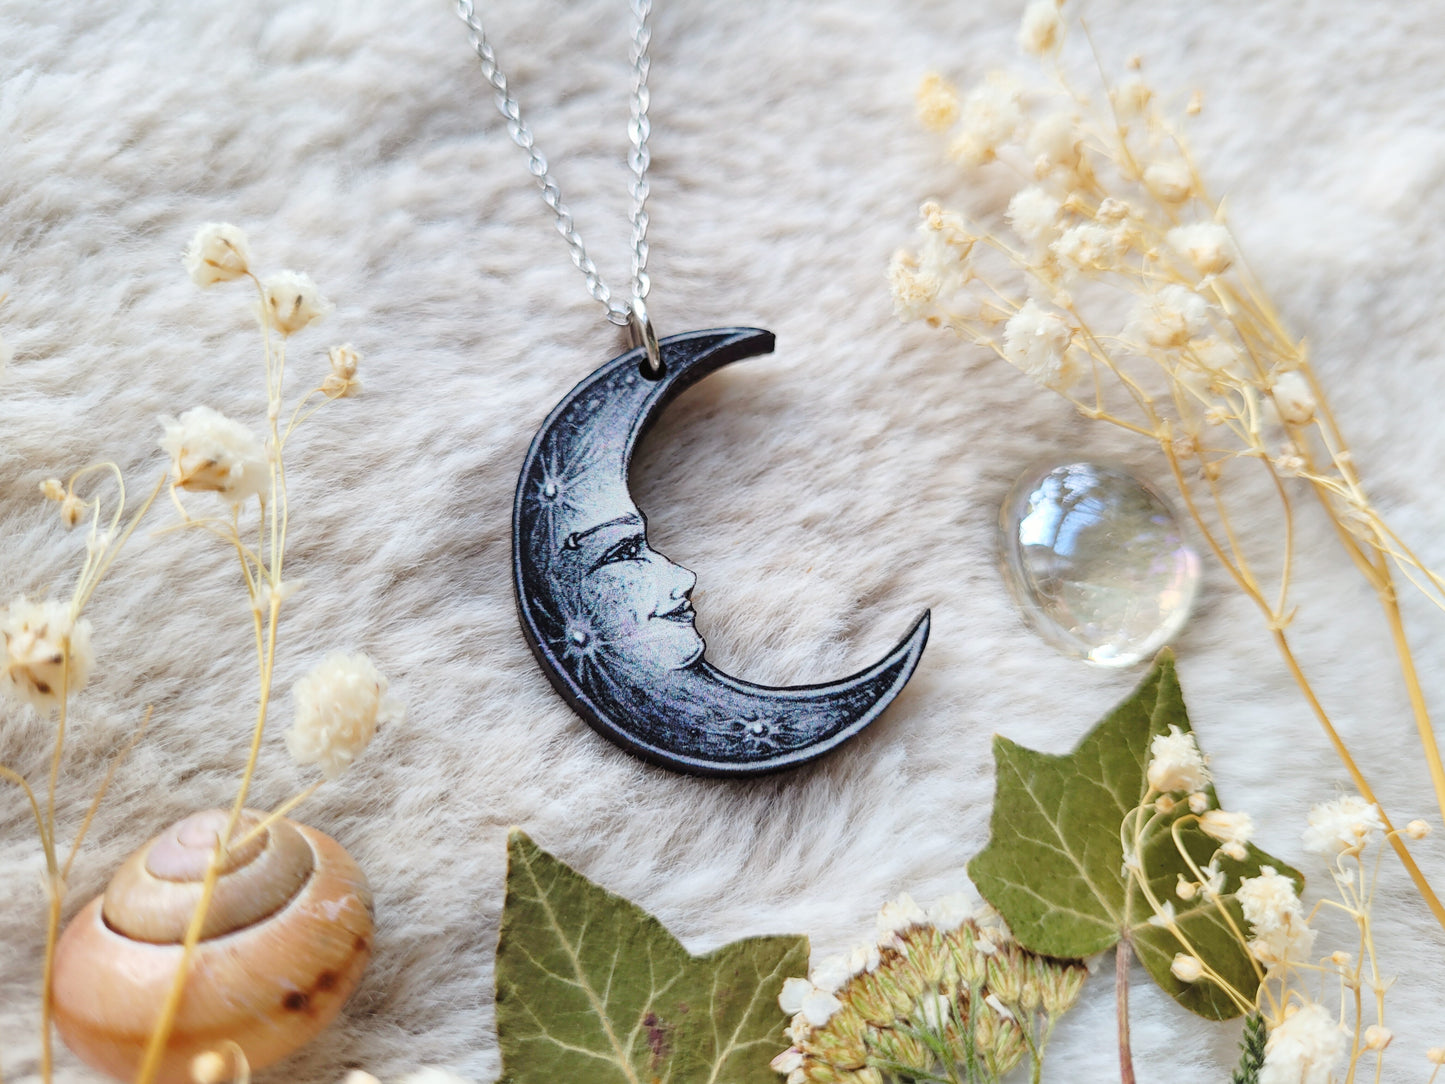 Crescent moon goddess Illustrated necklace, responsibly sourced cherry wood, chain options available, by Grace Moth